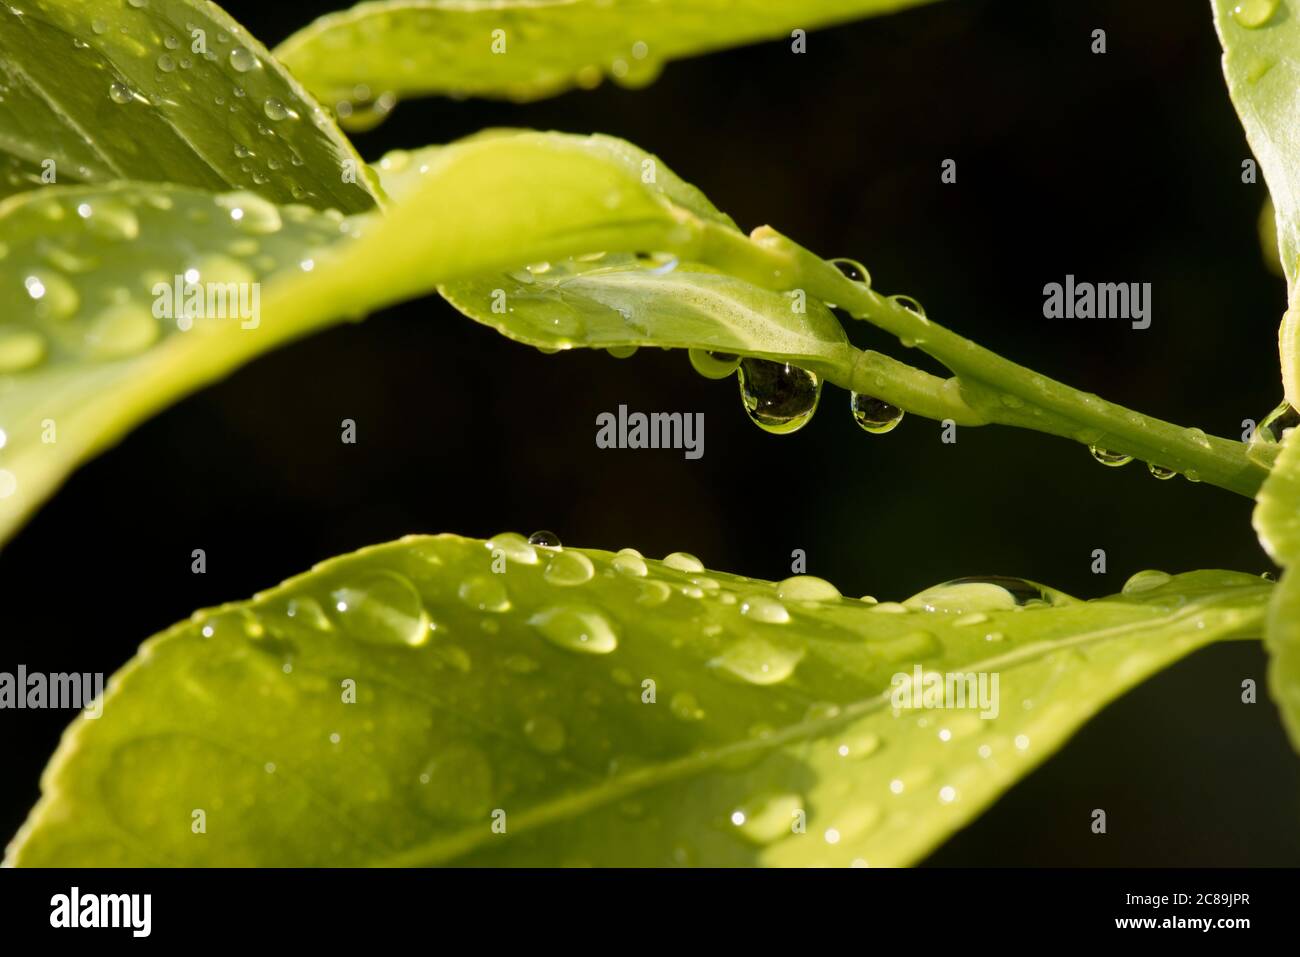 Rain drops in the sunbshine on young leaves of a lemon (Citrus limon) tree after a heavy rain shower, Berkshire, June Stock Photo